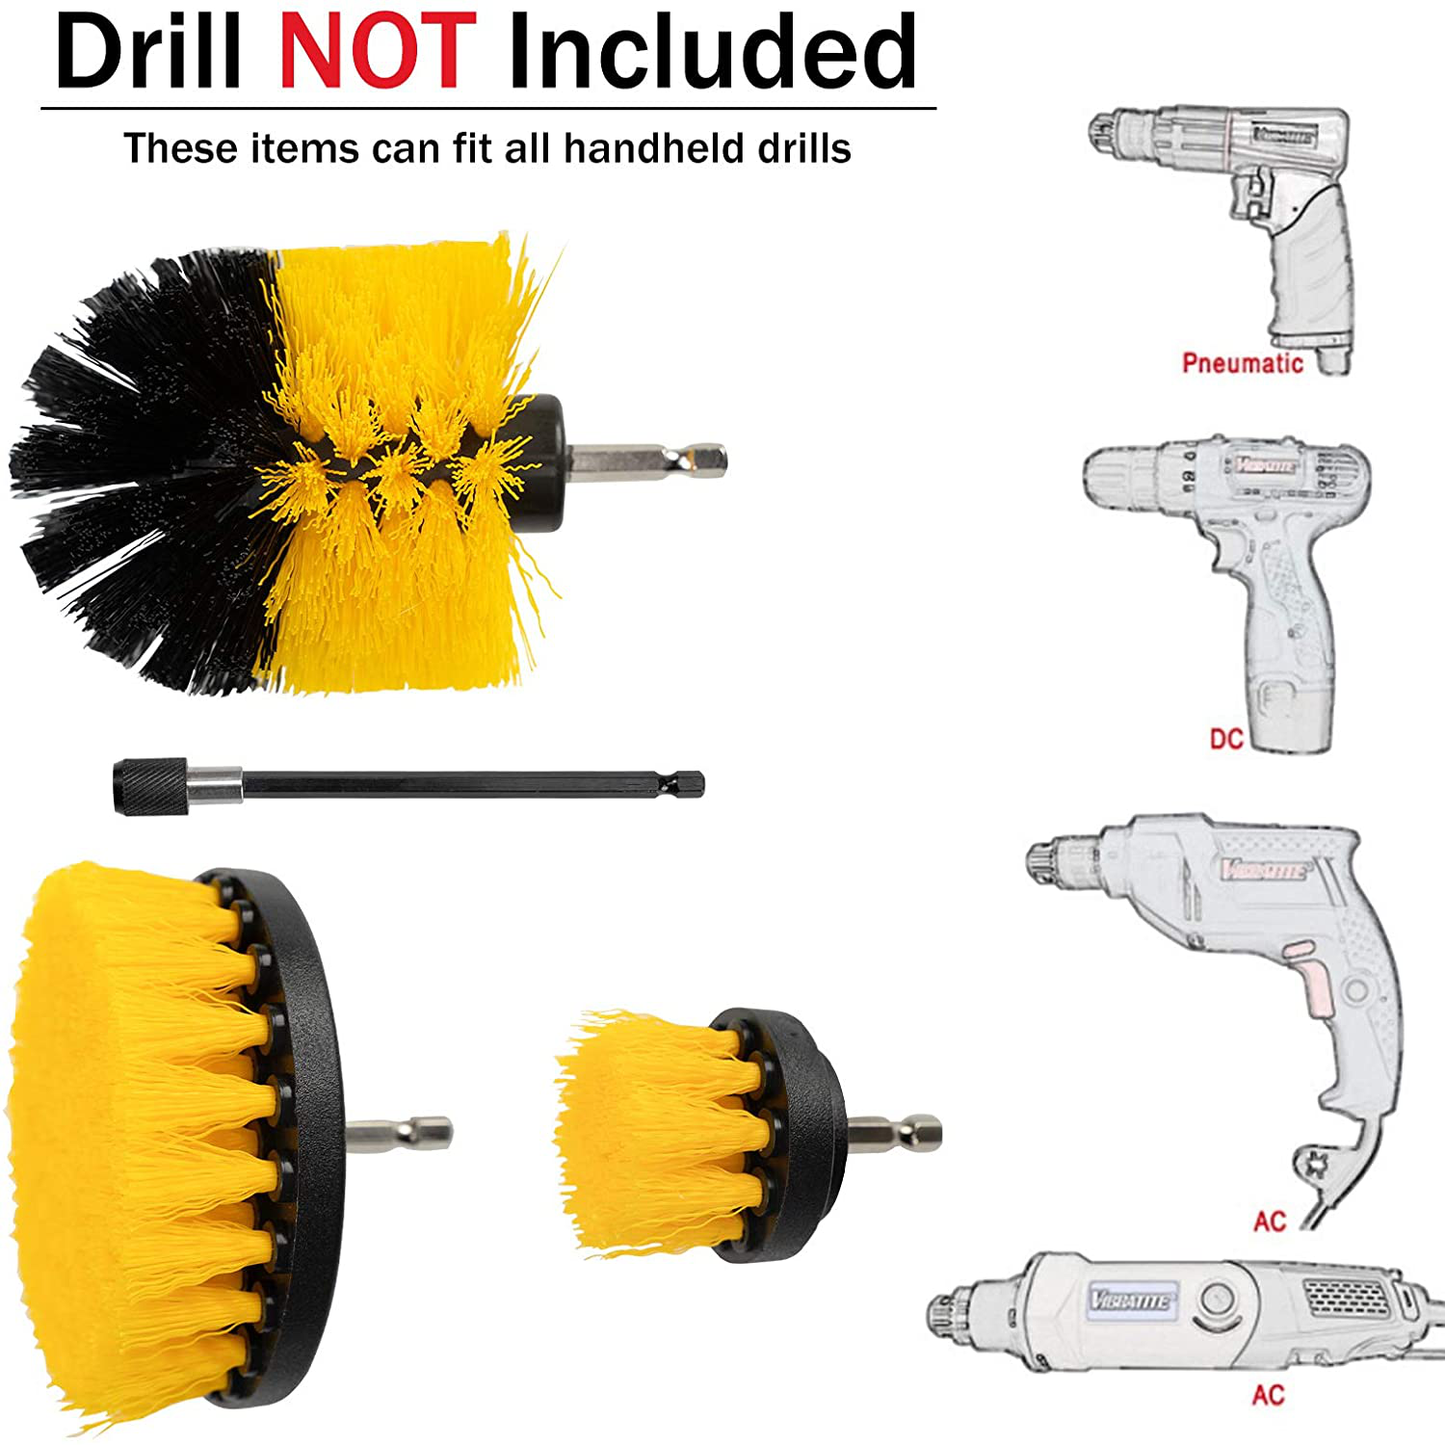 [4 Pack] Auto Detailing Drill Brush Set, Wheel Cleaner Brush, Car Cleaner Wash Brush Supplies Kit Fit Tire, Car Mats, Floor Mat, Bathroom and Auto Power Scrubber Brush Cleaning Sets